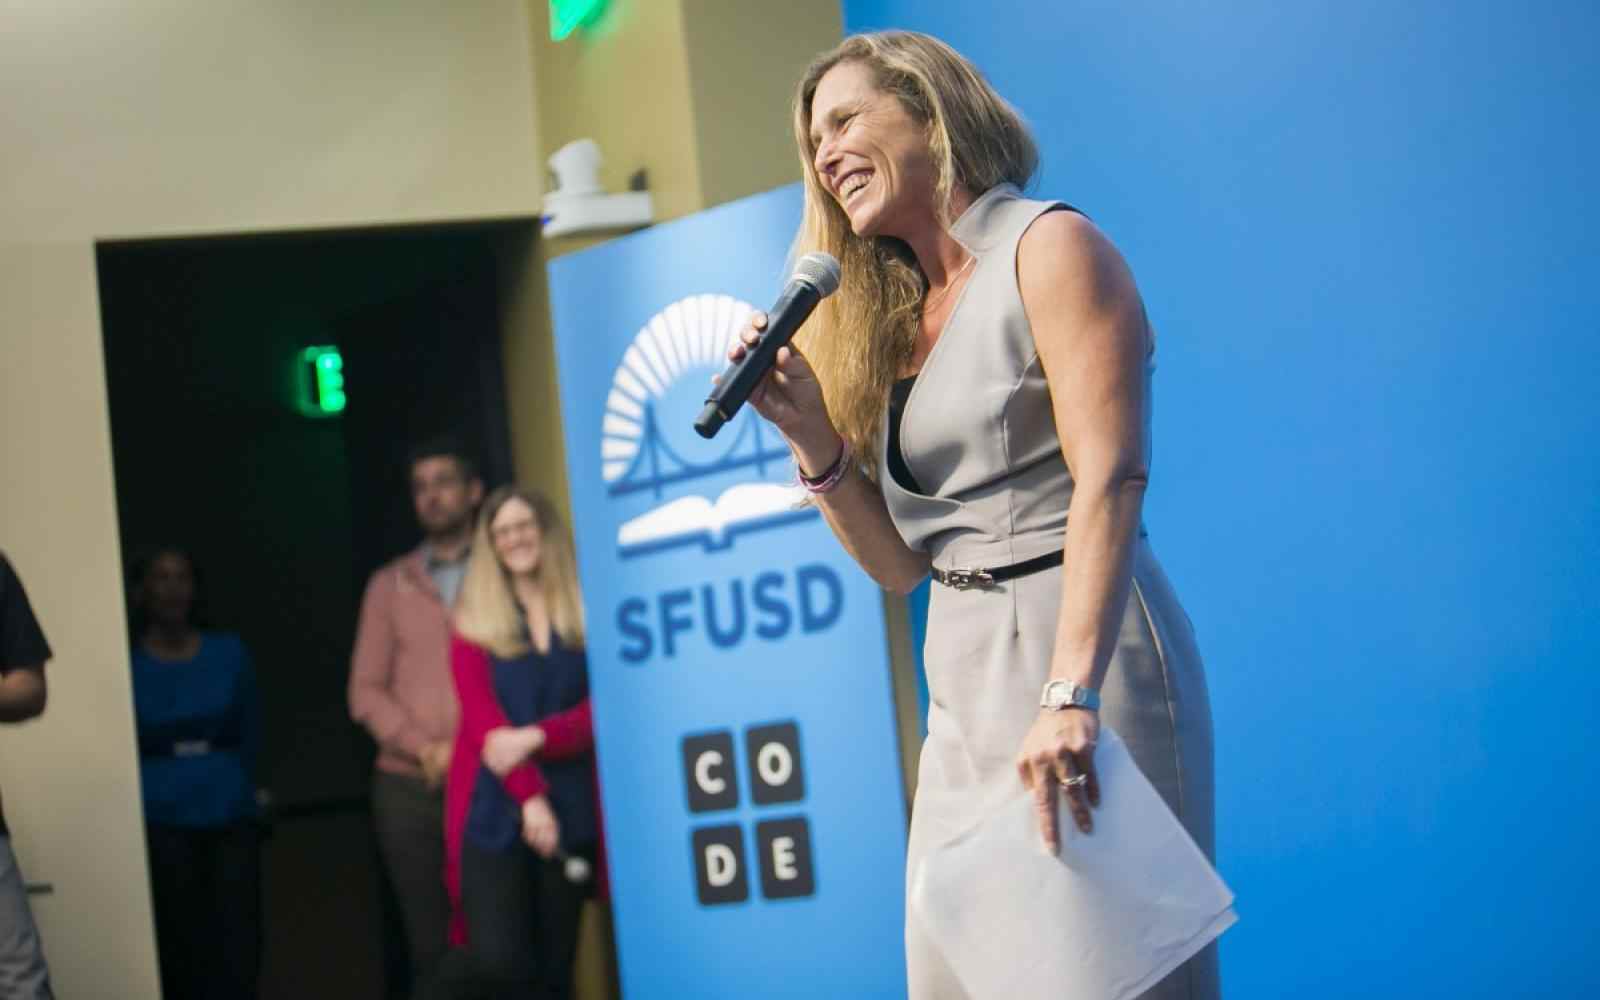 Salesforce Chief Philanthropy Officer Suzanne DiBianca Wants All Companies To Drive Social Change